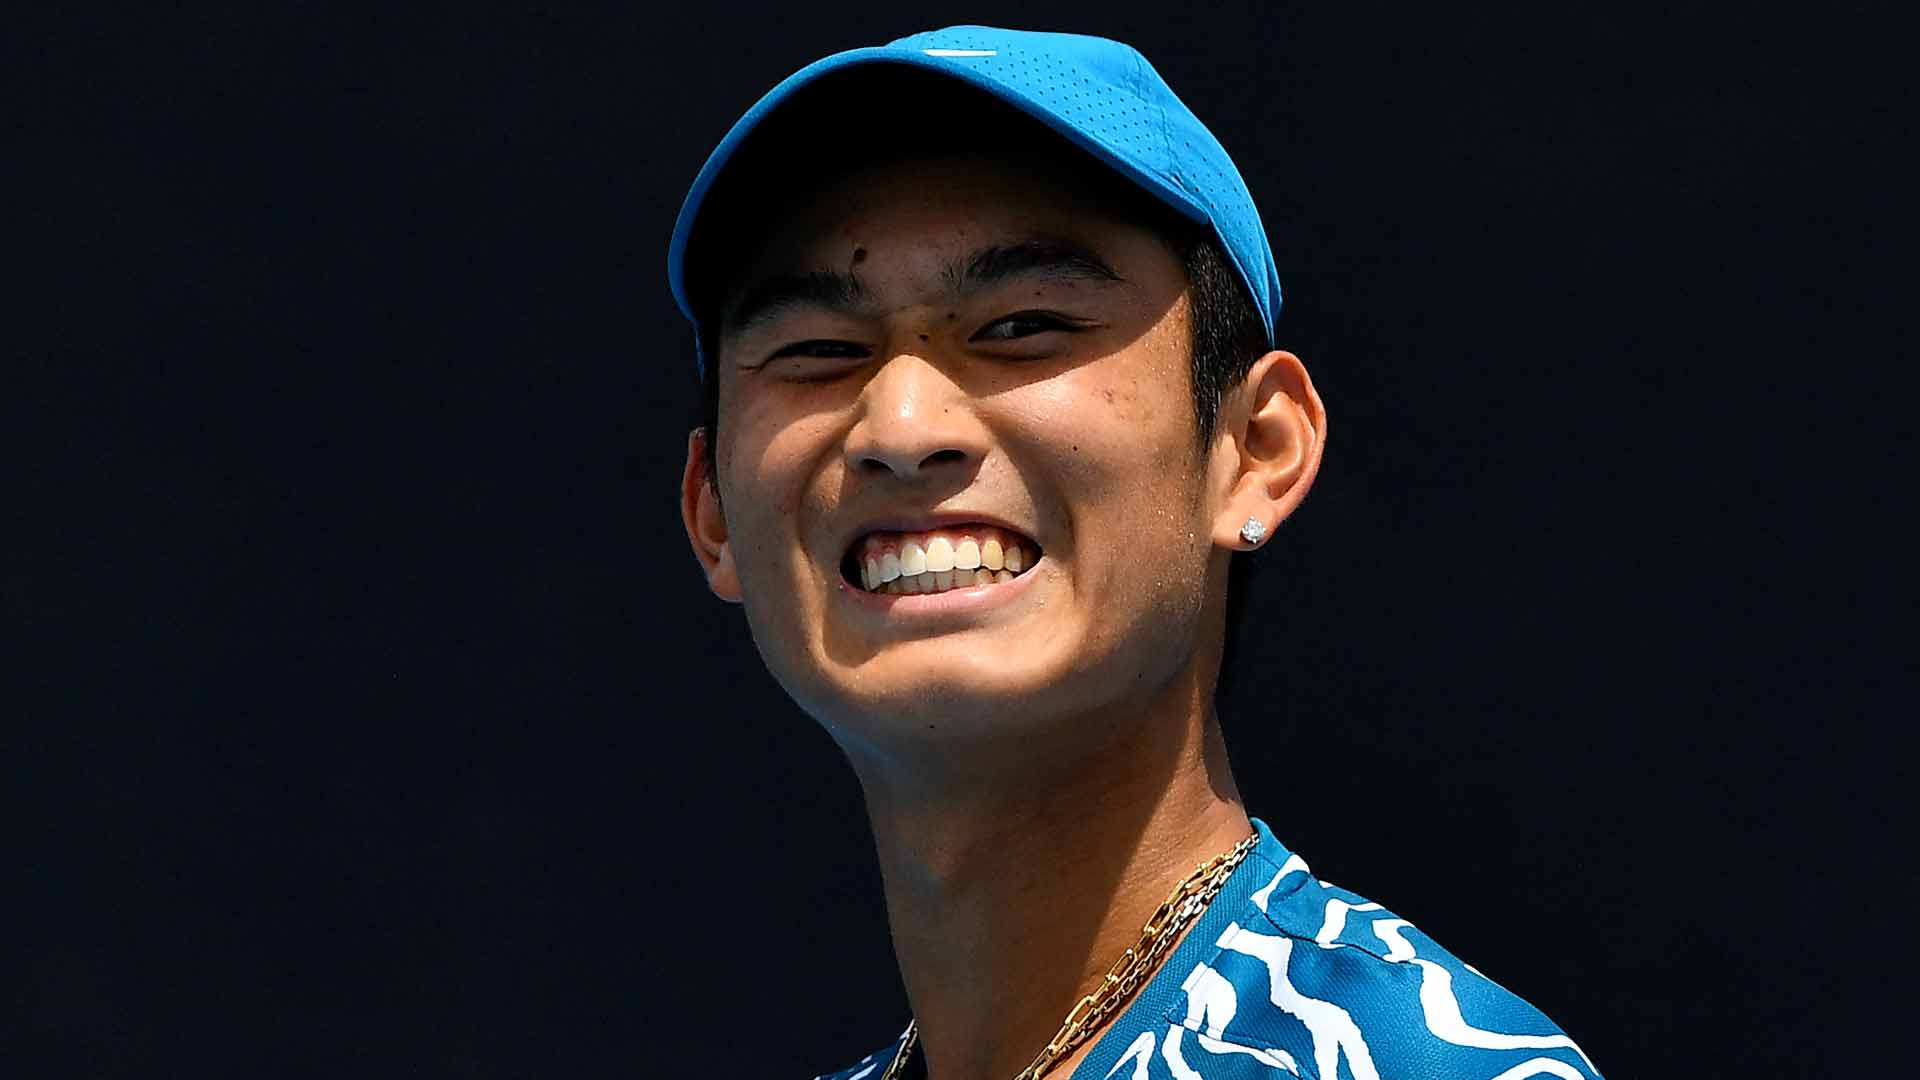 Shang Juncheng is the youngest player in the Top 200 of the Pepperstone ATP Rankings.